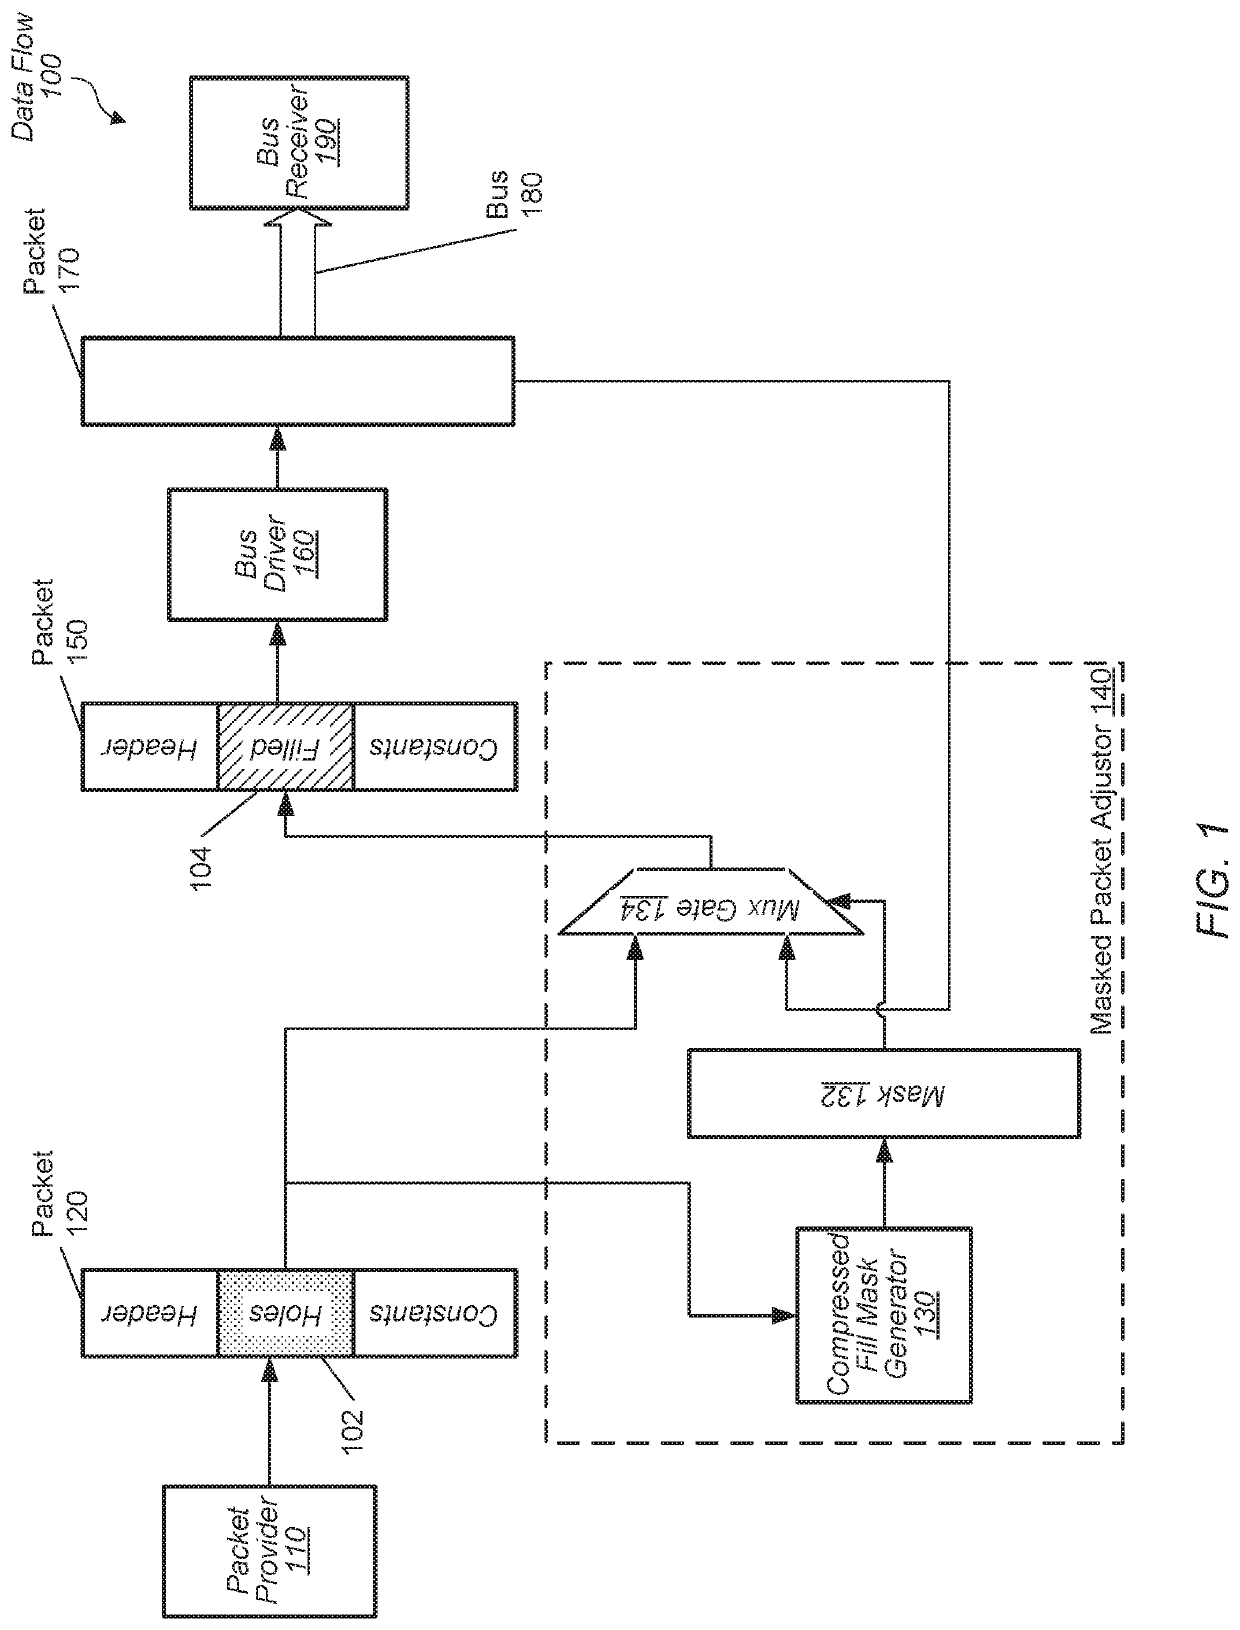 Power-oriented bus encoding for data transmission